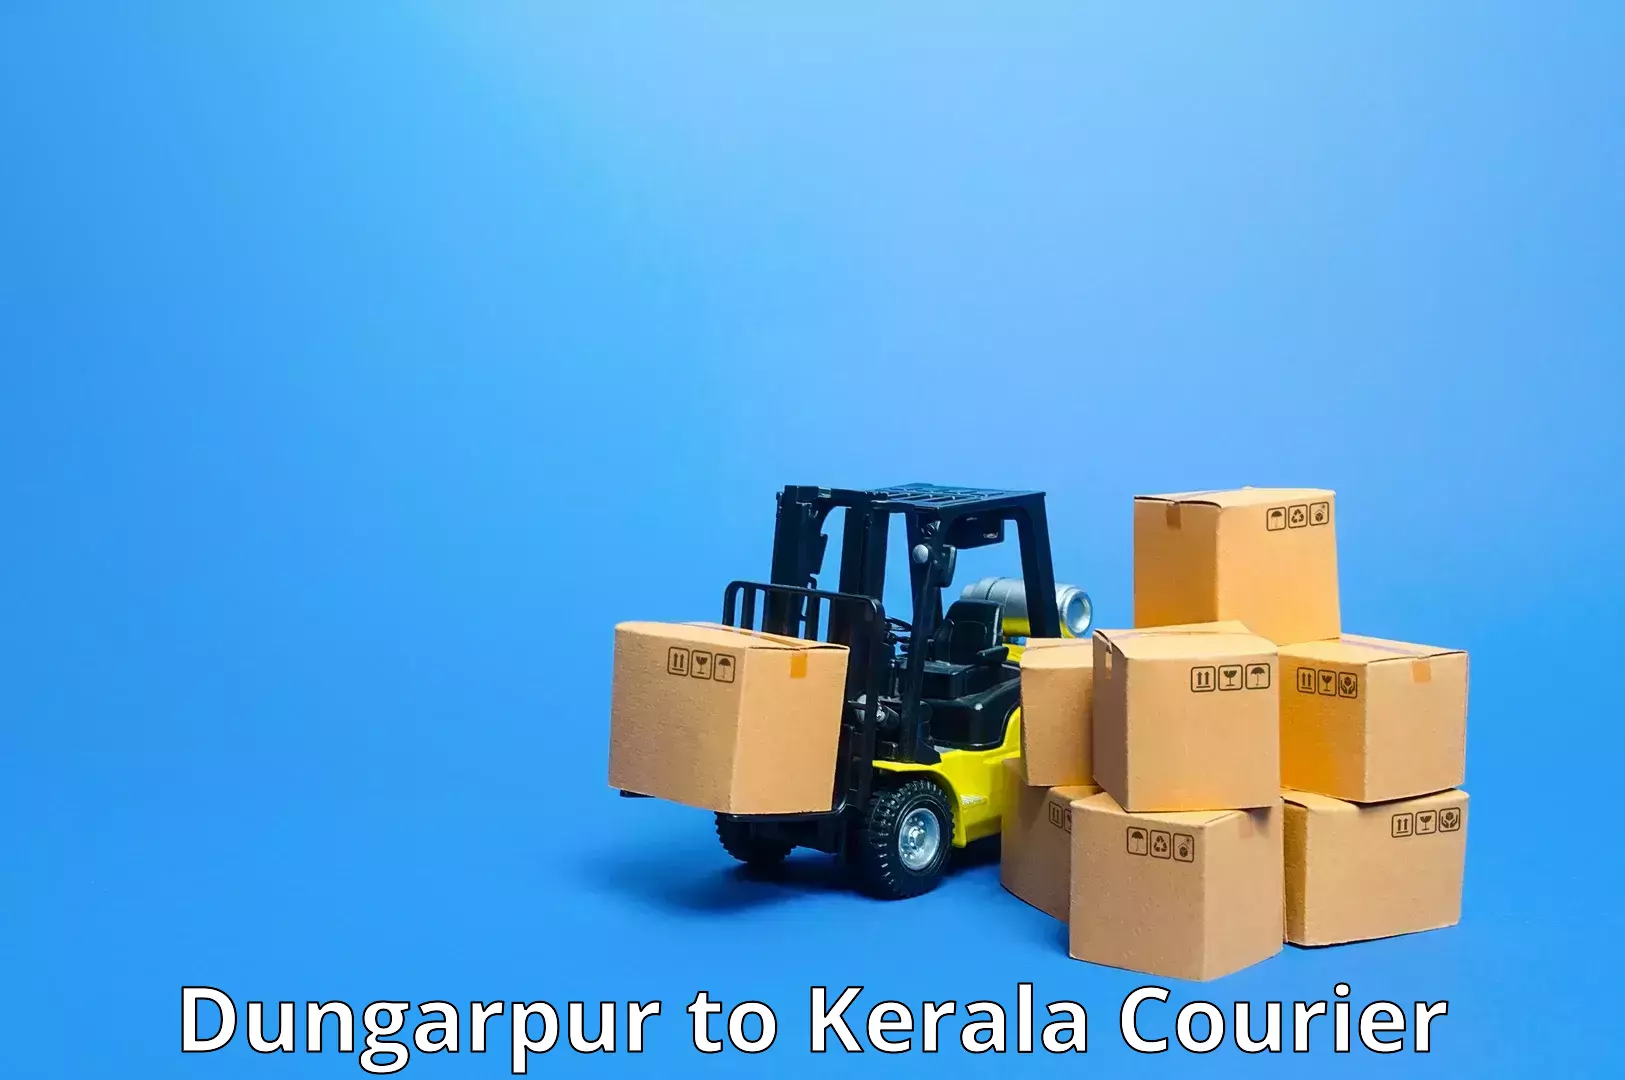 Fast delivery service Dungarpur to Ernakulam